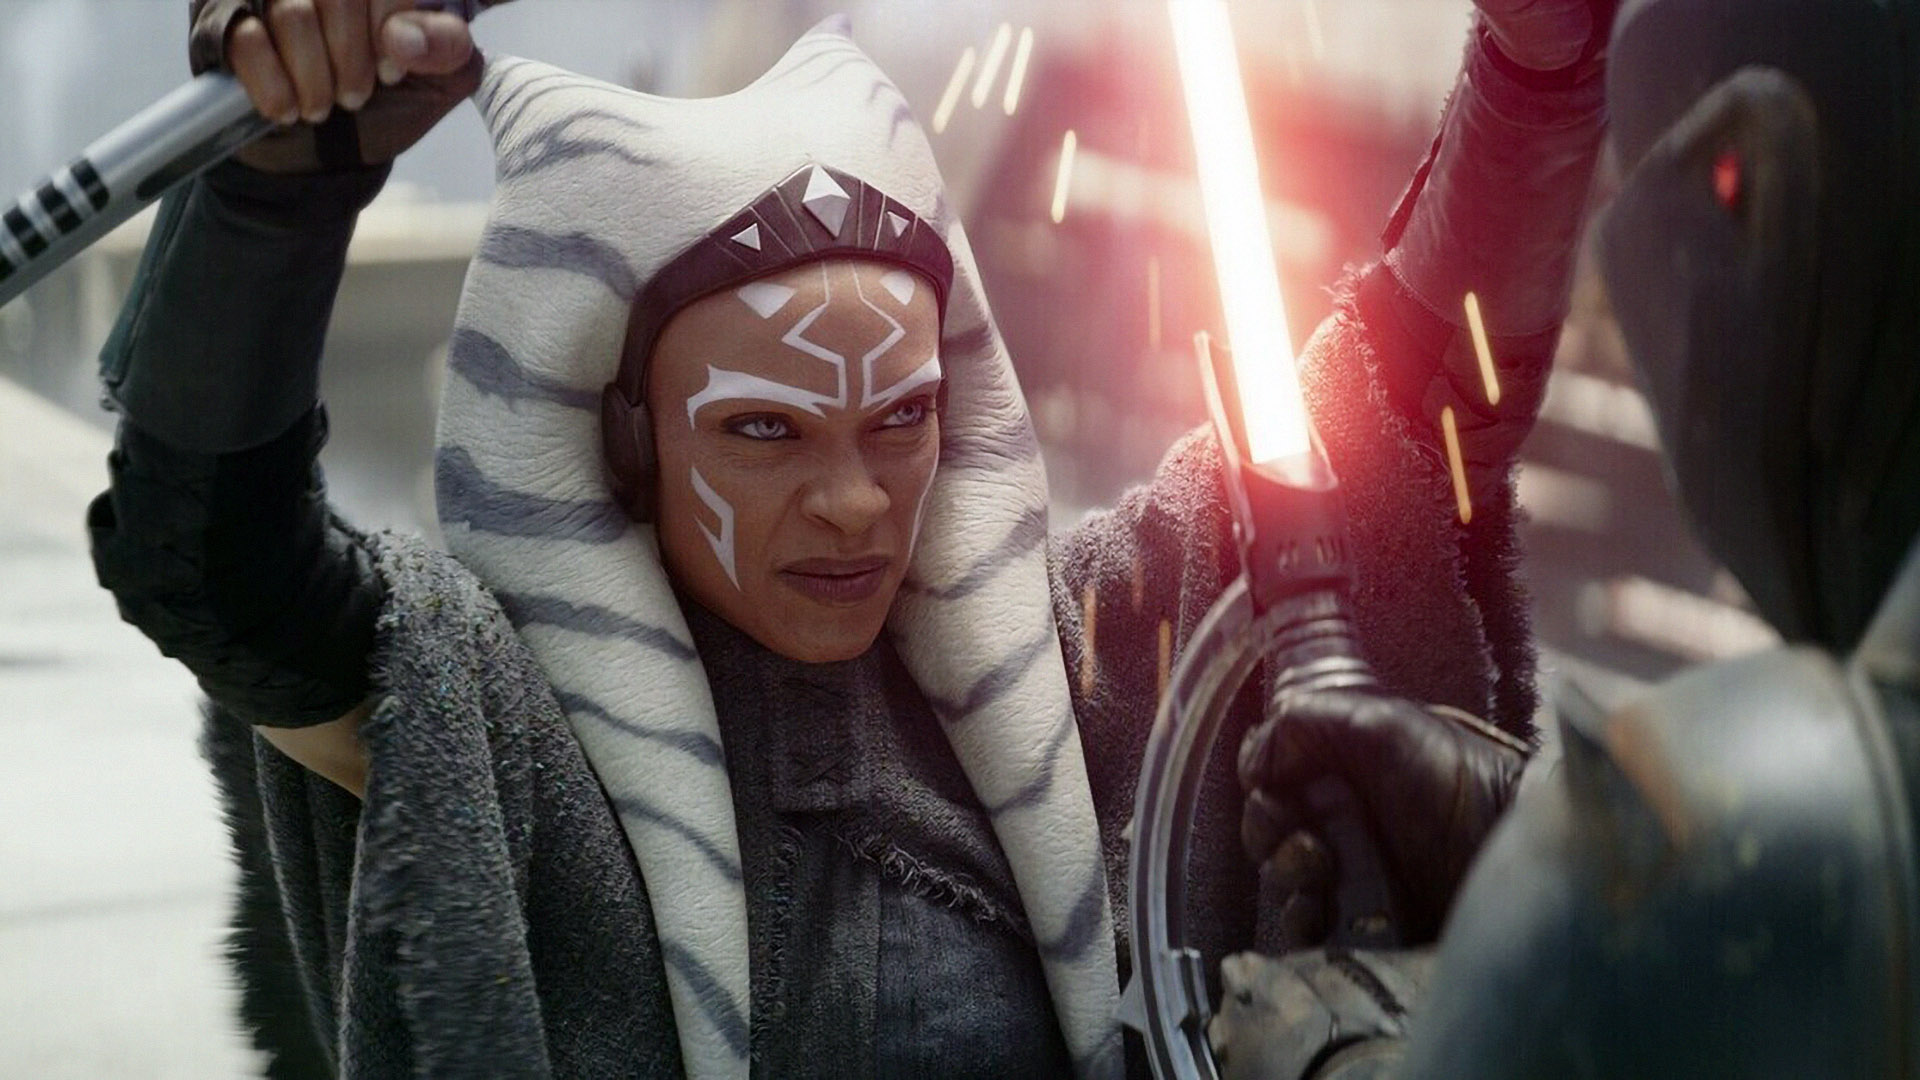 What's Next for Disney's Star Wars Franchise After Ahsoka's Mediocre Performance?